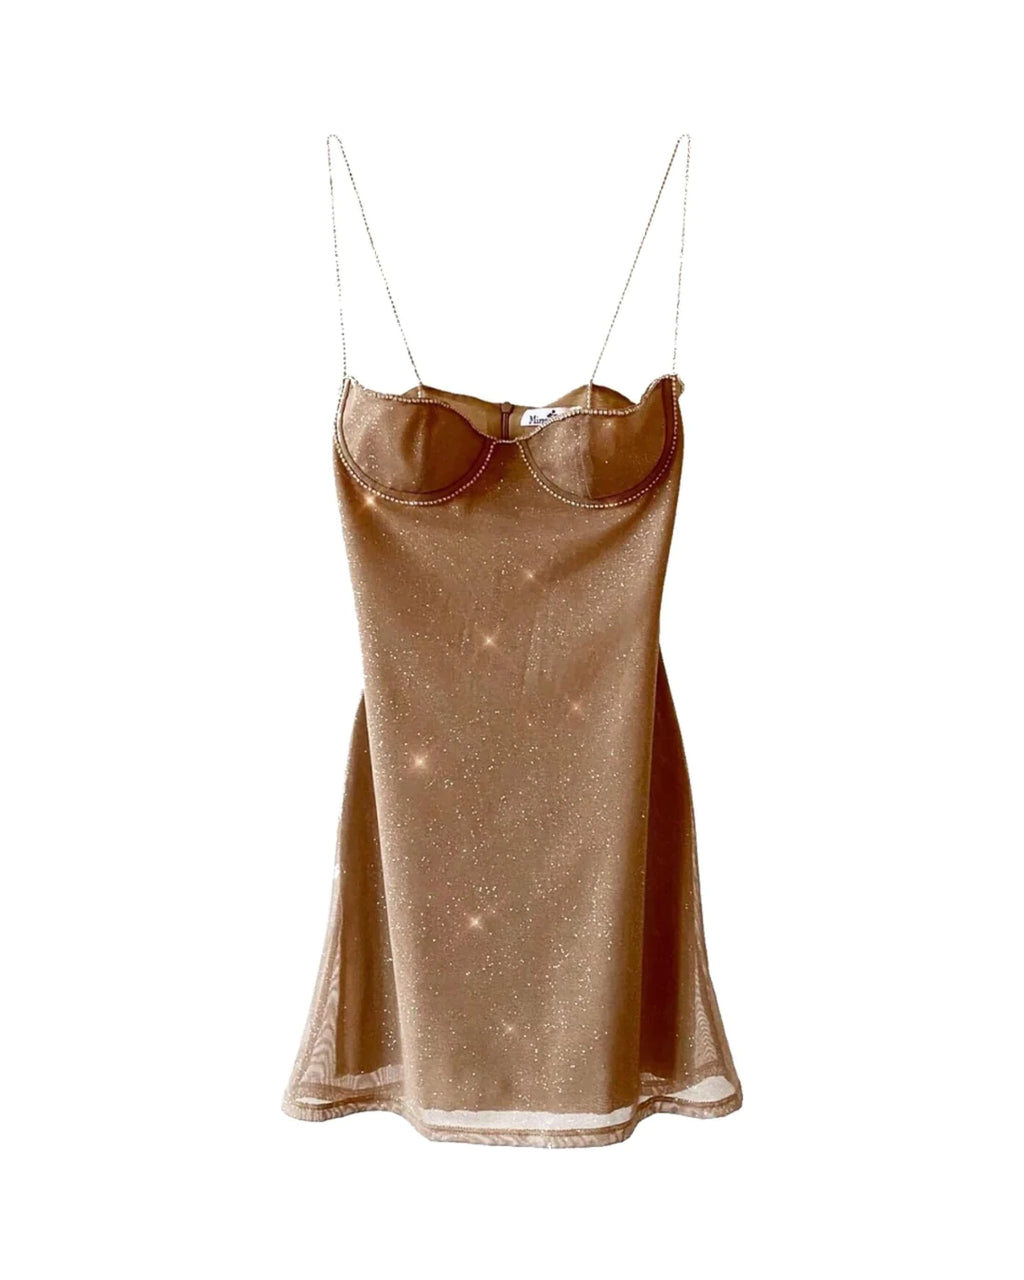 Mirror Palais - Fairy Dress in Diamond Sand • Curated By KT